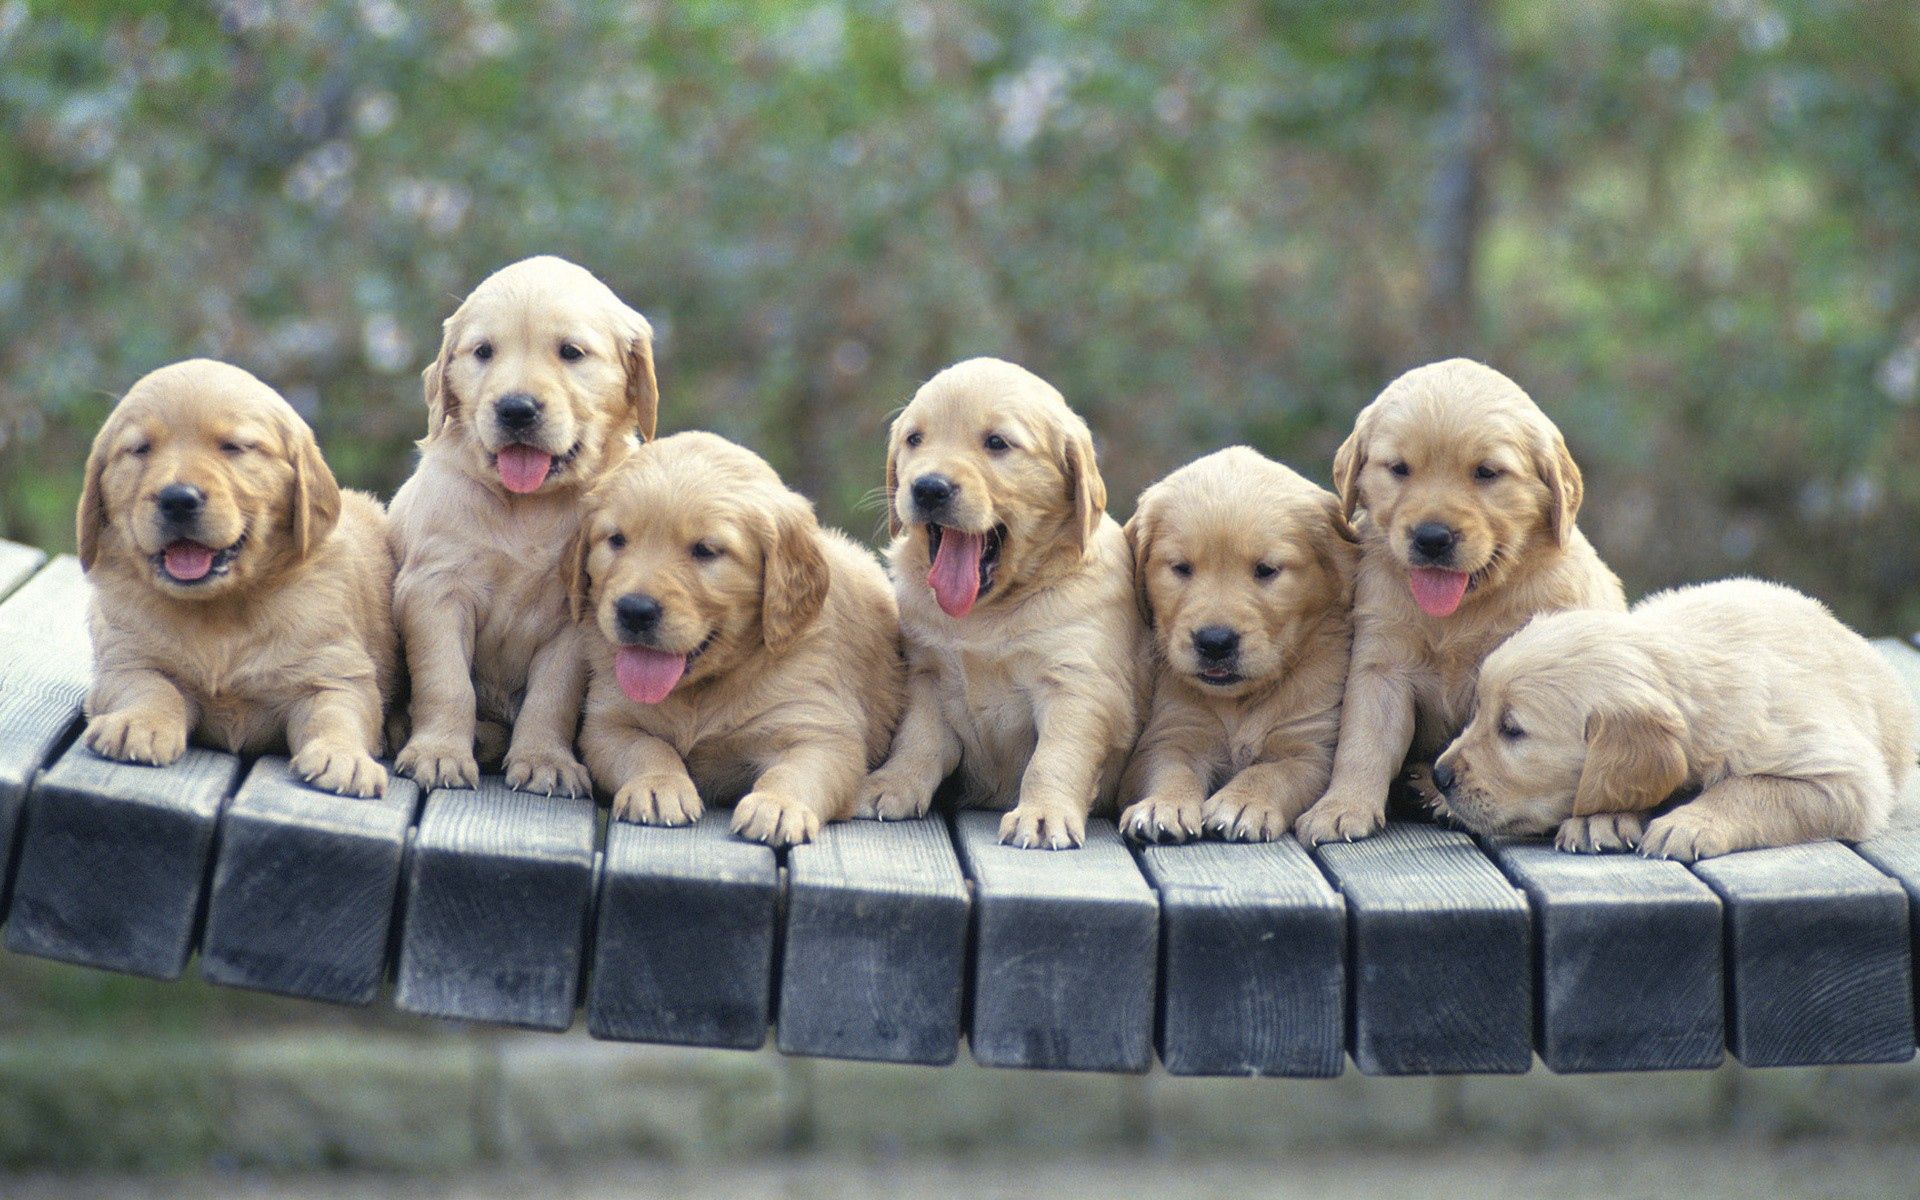 puppies, animals, multitude, dogs, lots of